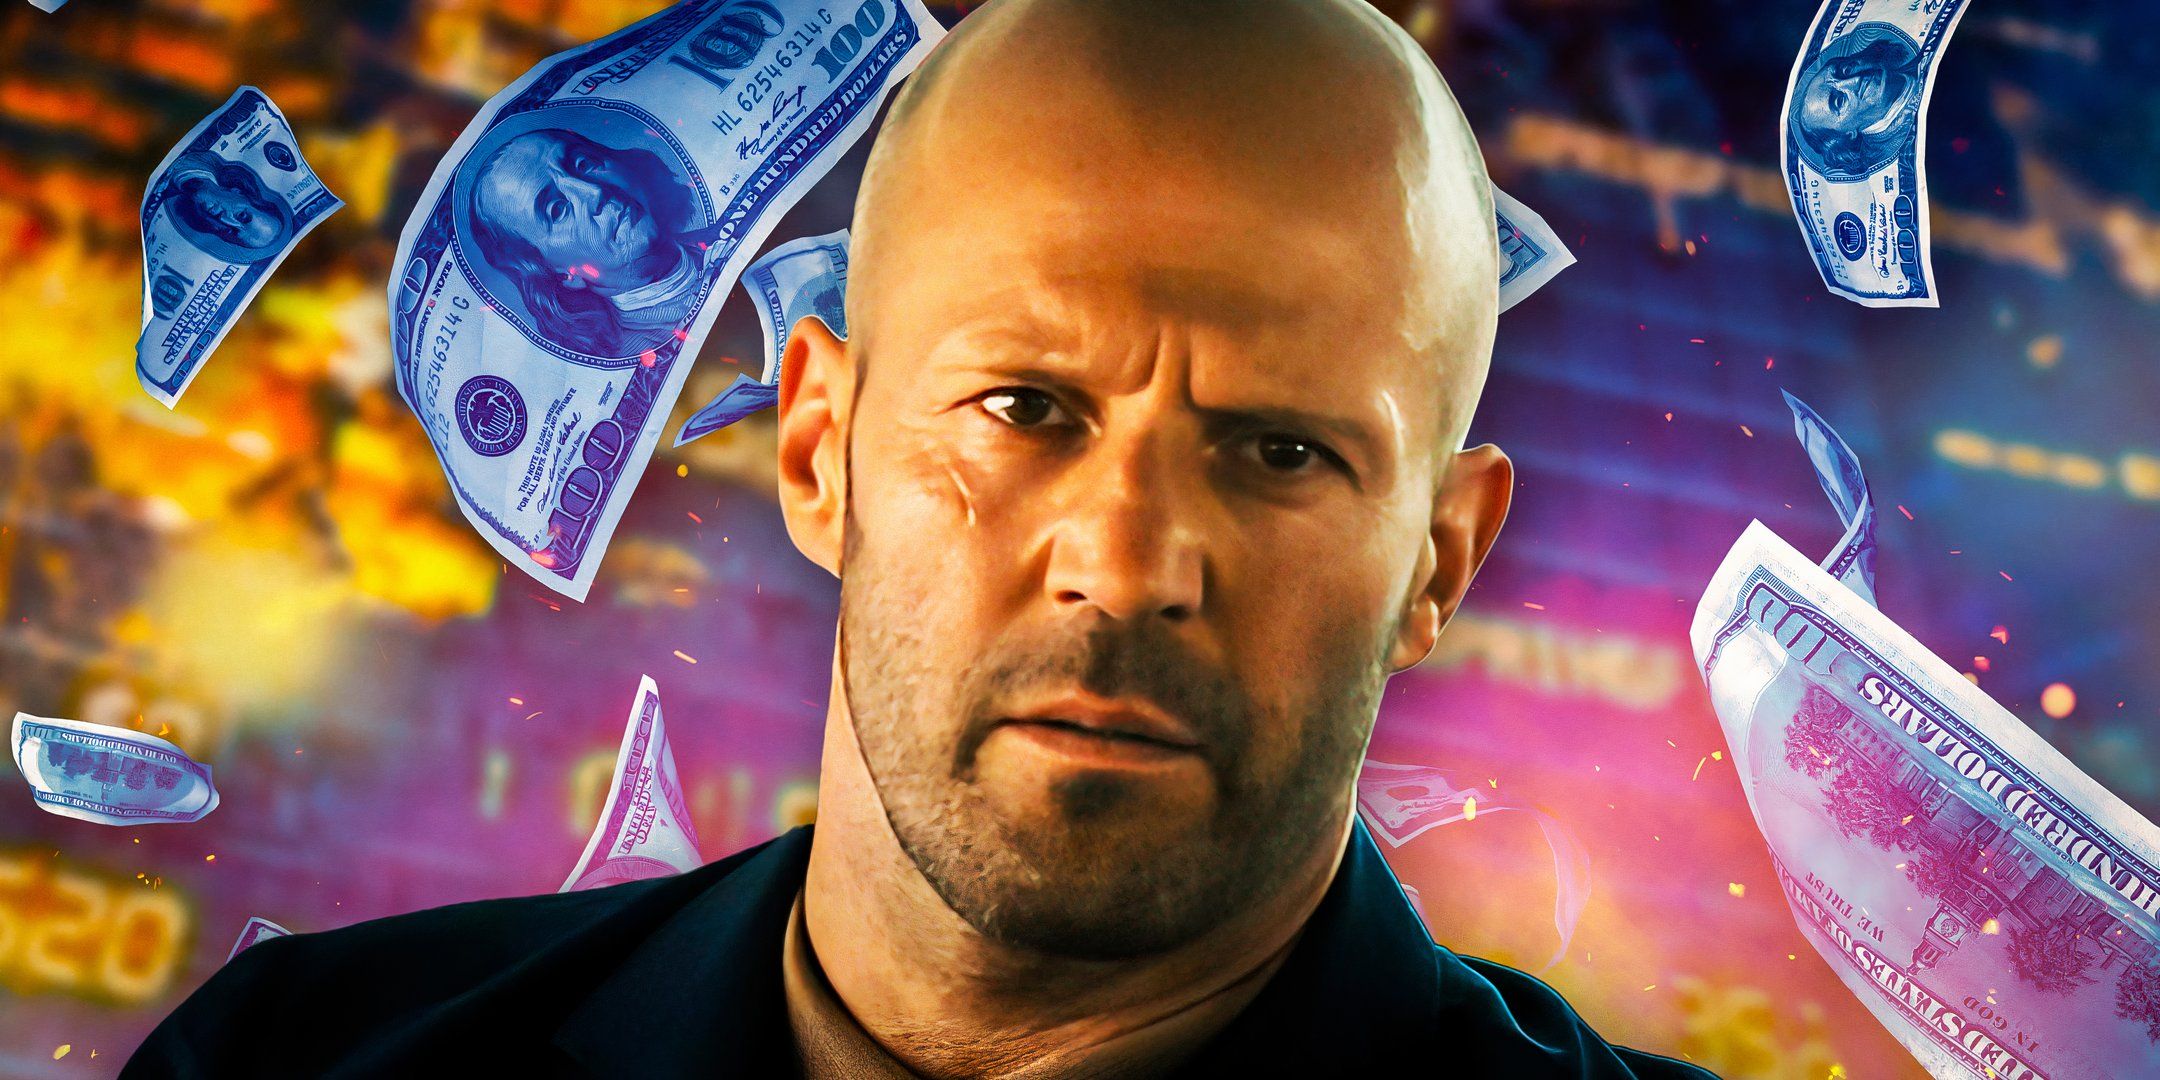 Jason Statham’s $152M Action Hit Is Now On Prime & It’s One Of His Best Movies In Years